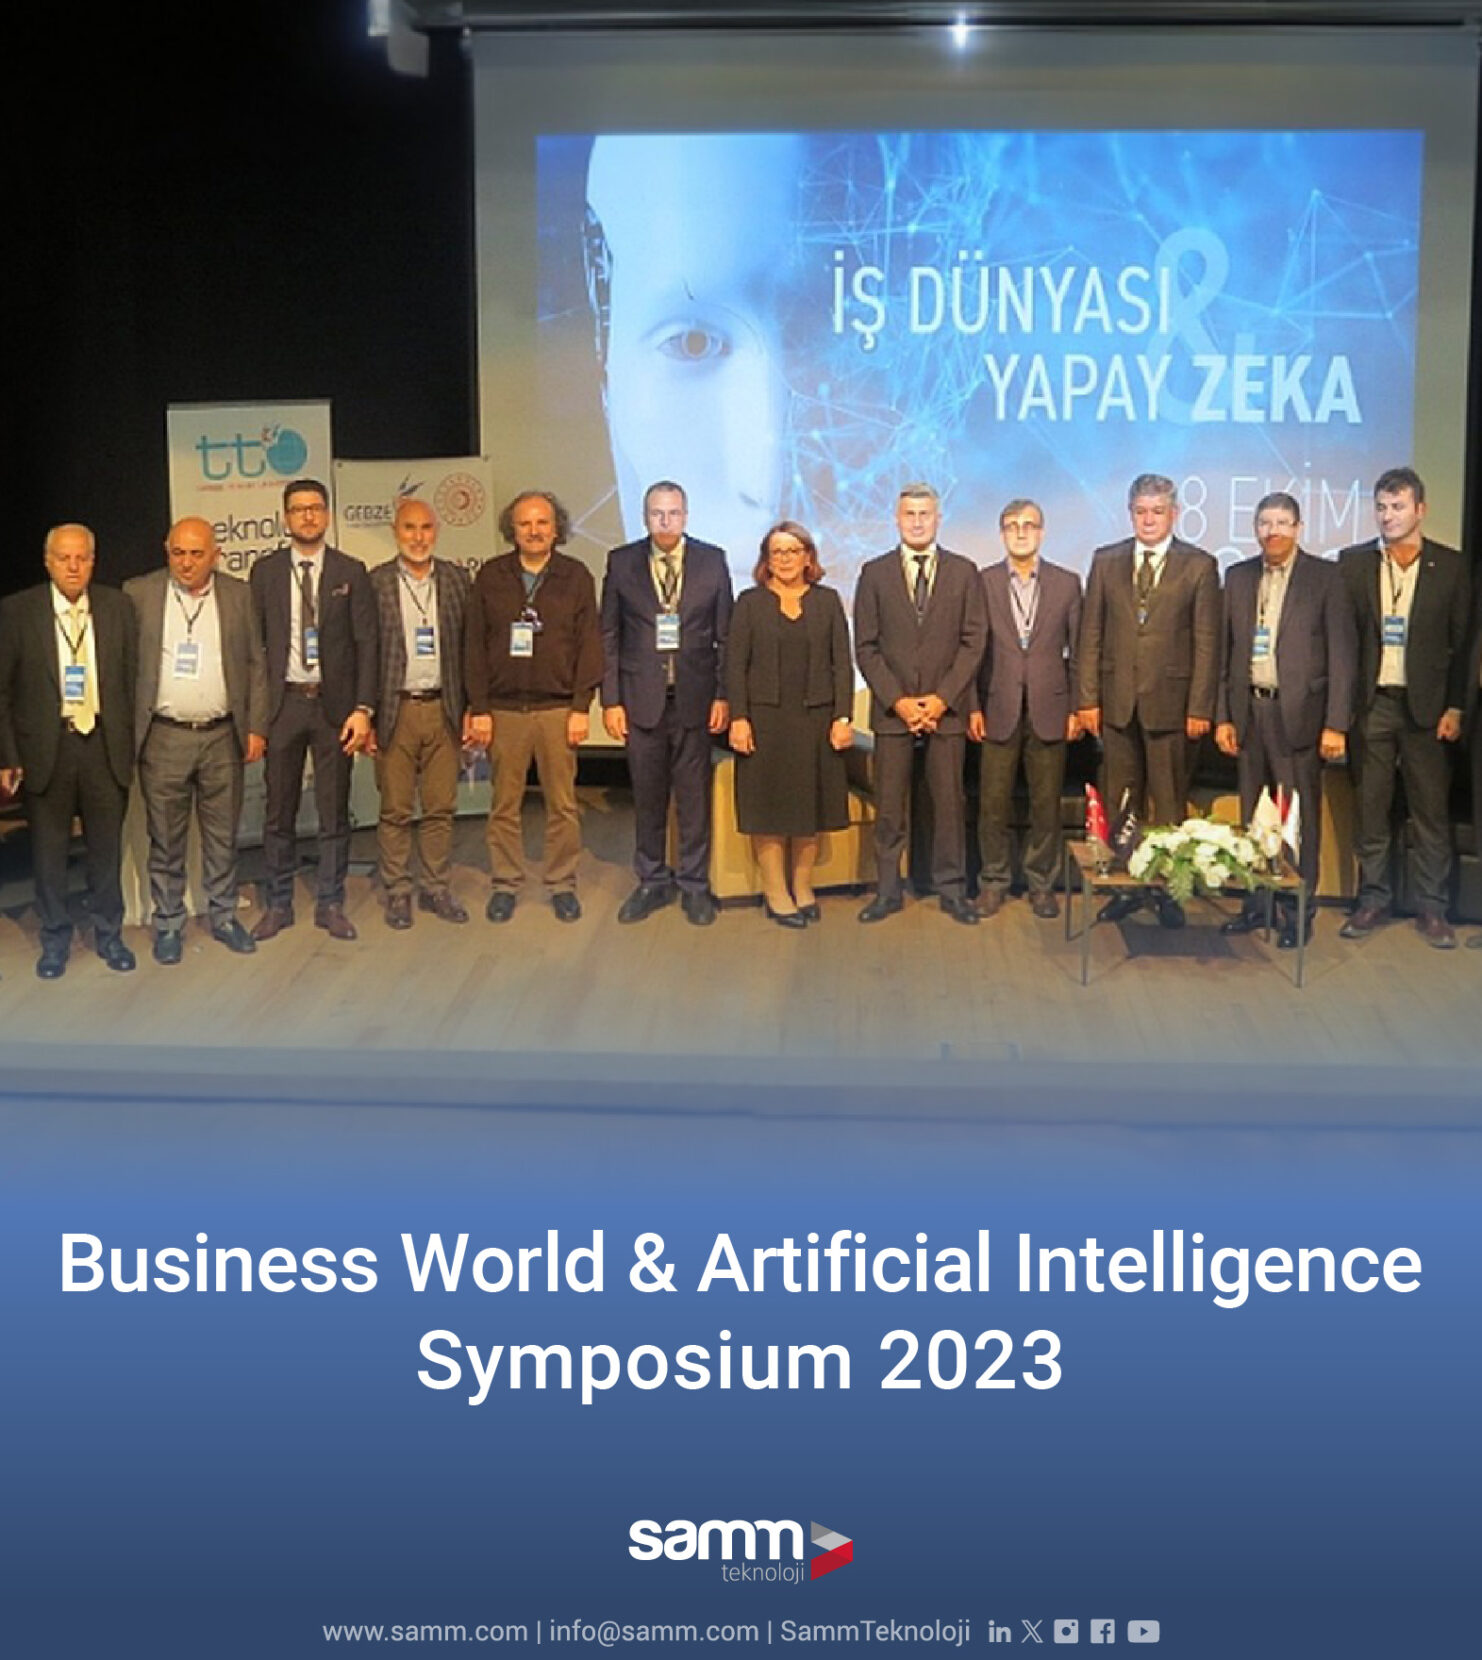 Symposium on ‘Business and Artificial Intelligence’ by Three Institutions